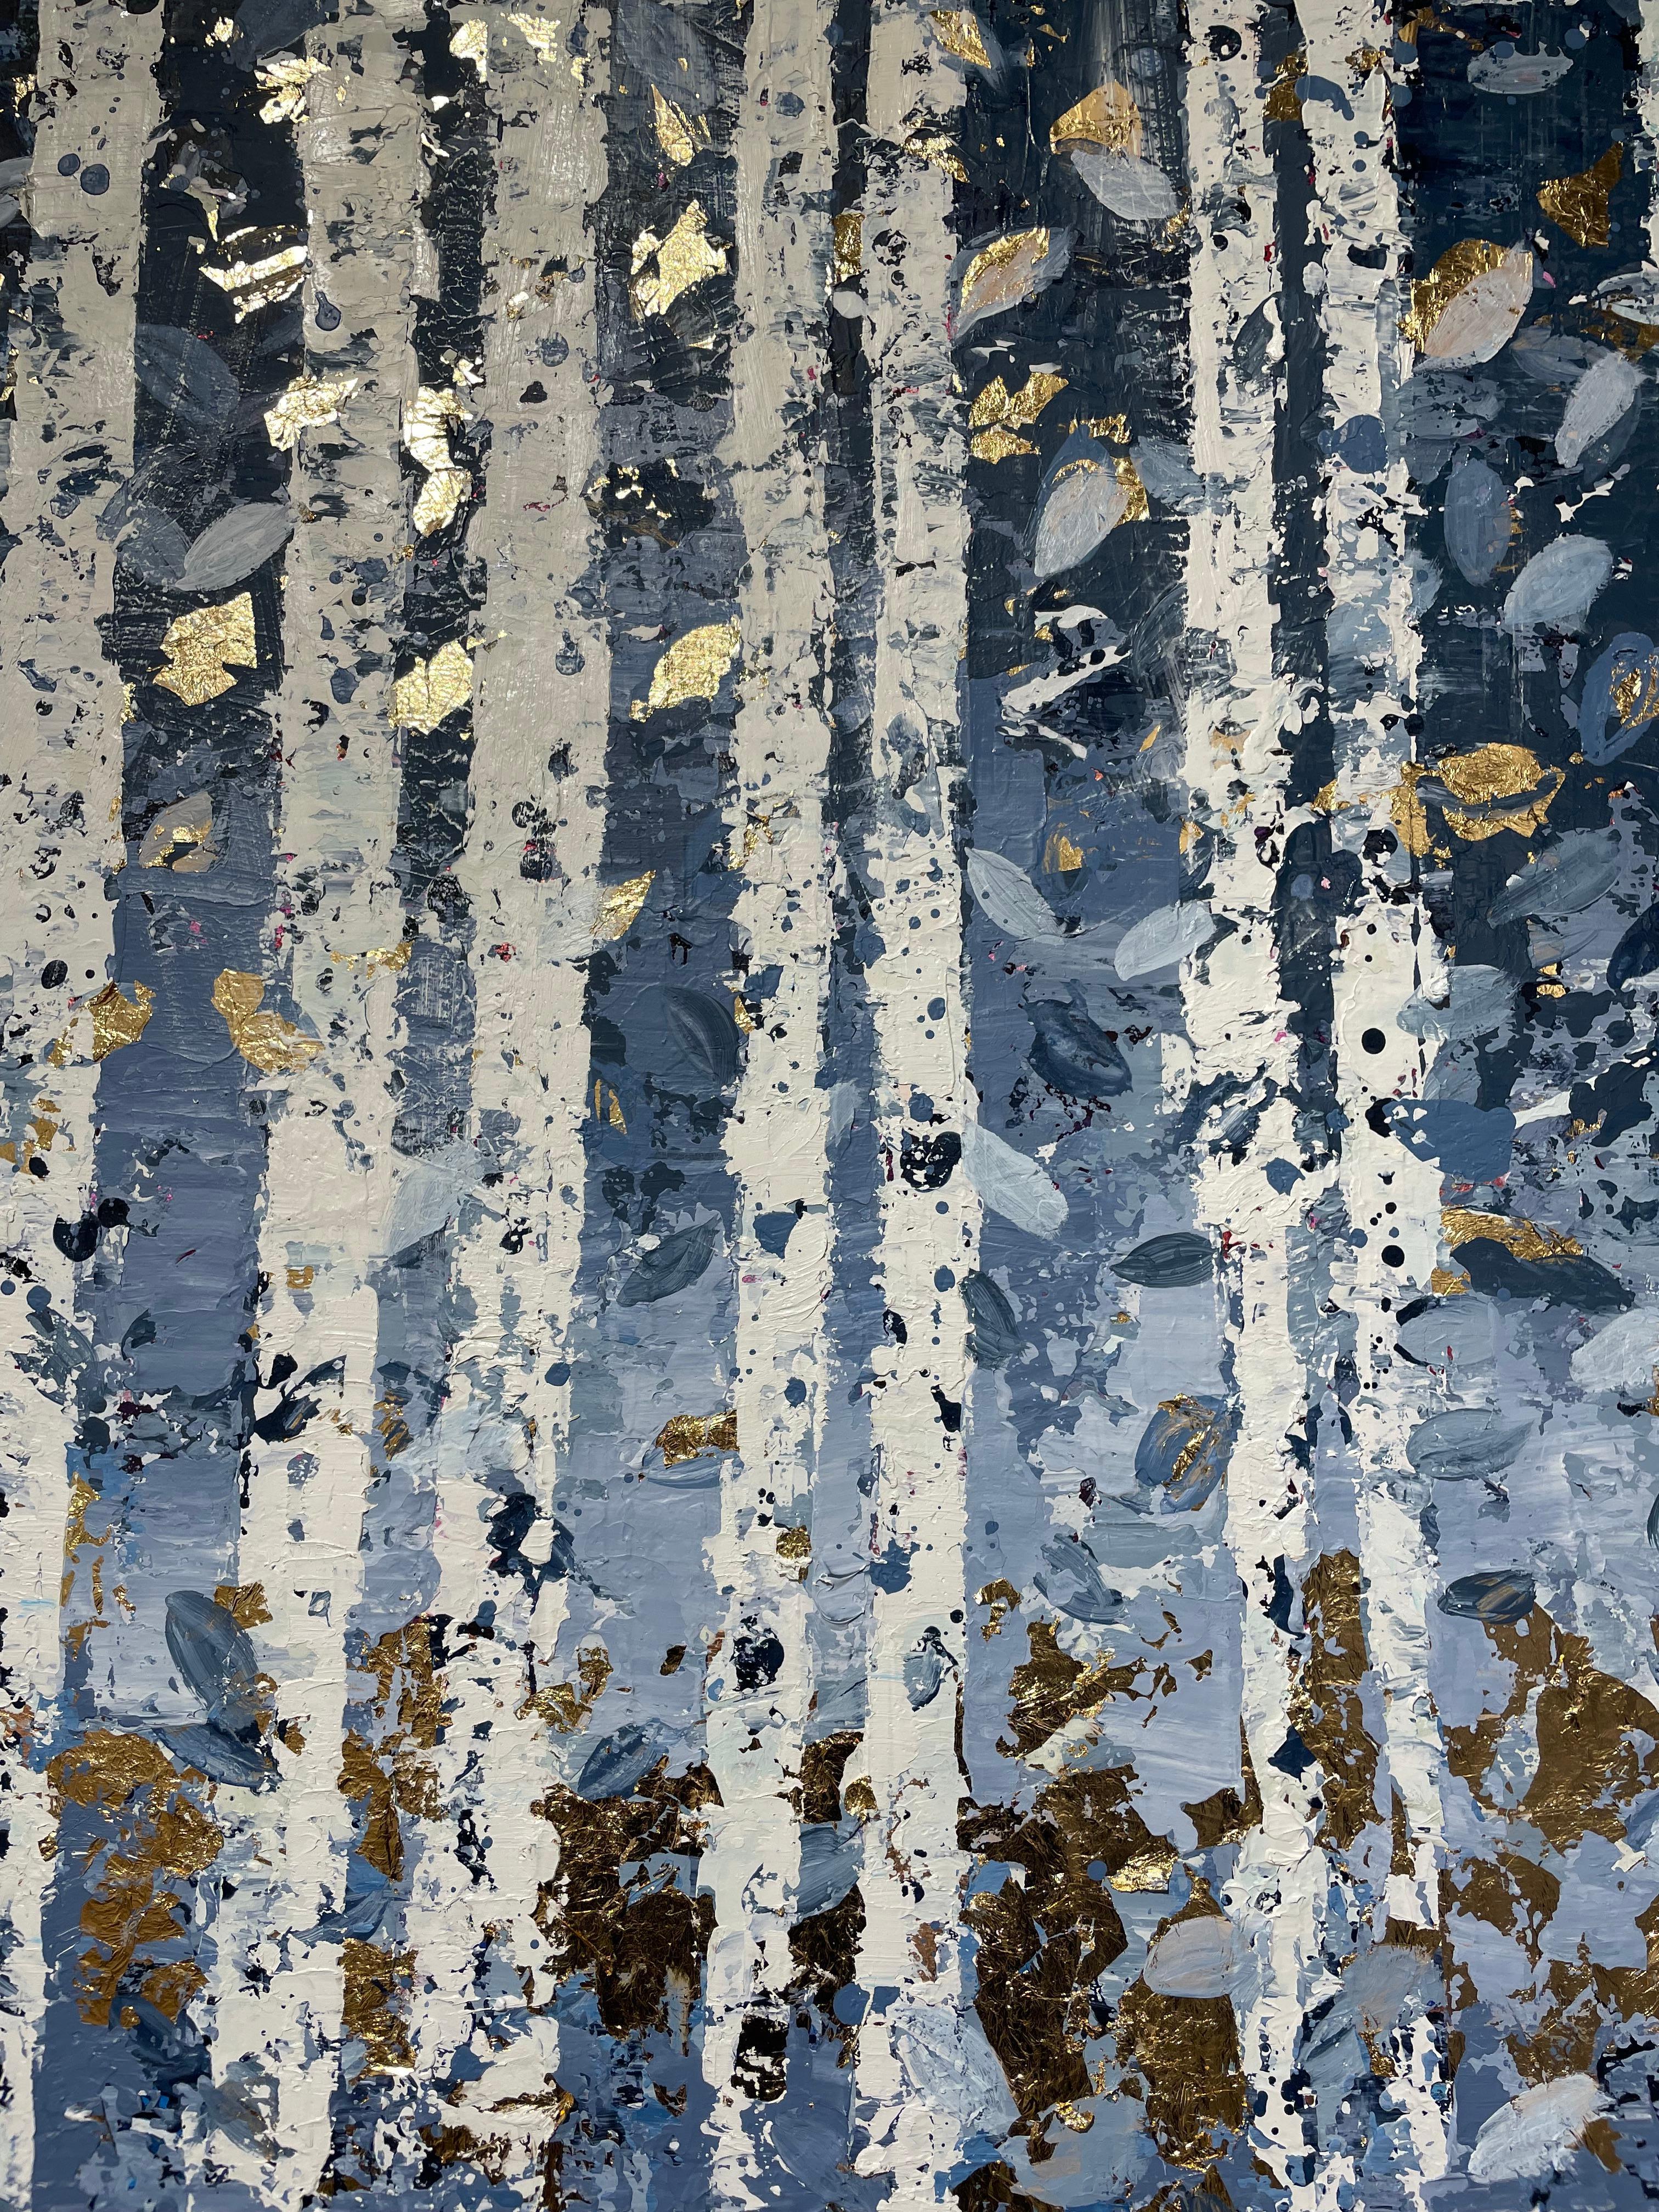 Medianoche con Hojas Doradas- 21st Cent., Oil, abstract, night, blue, gold leaf - Abstract Painting by Chelsea Davine